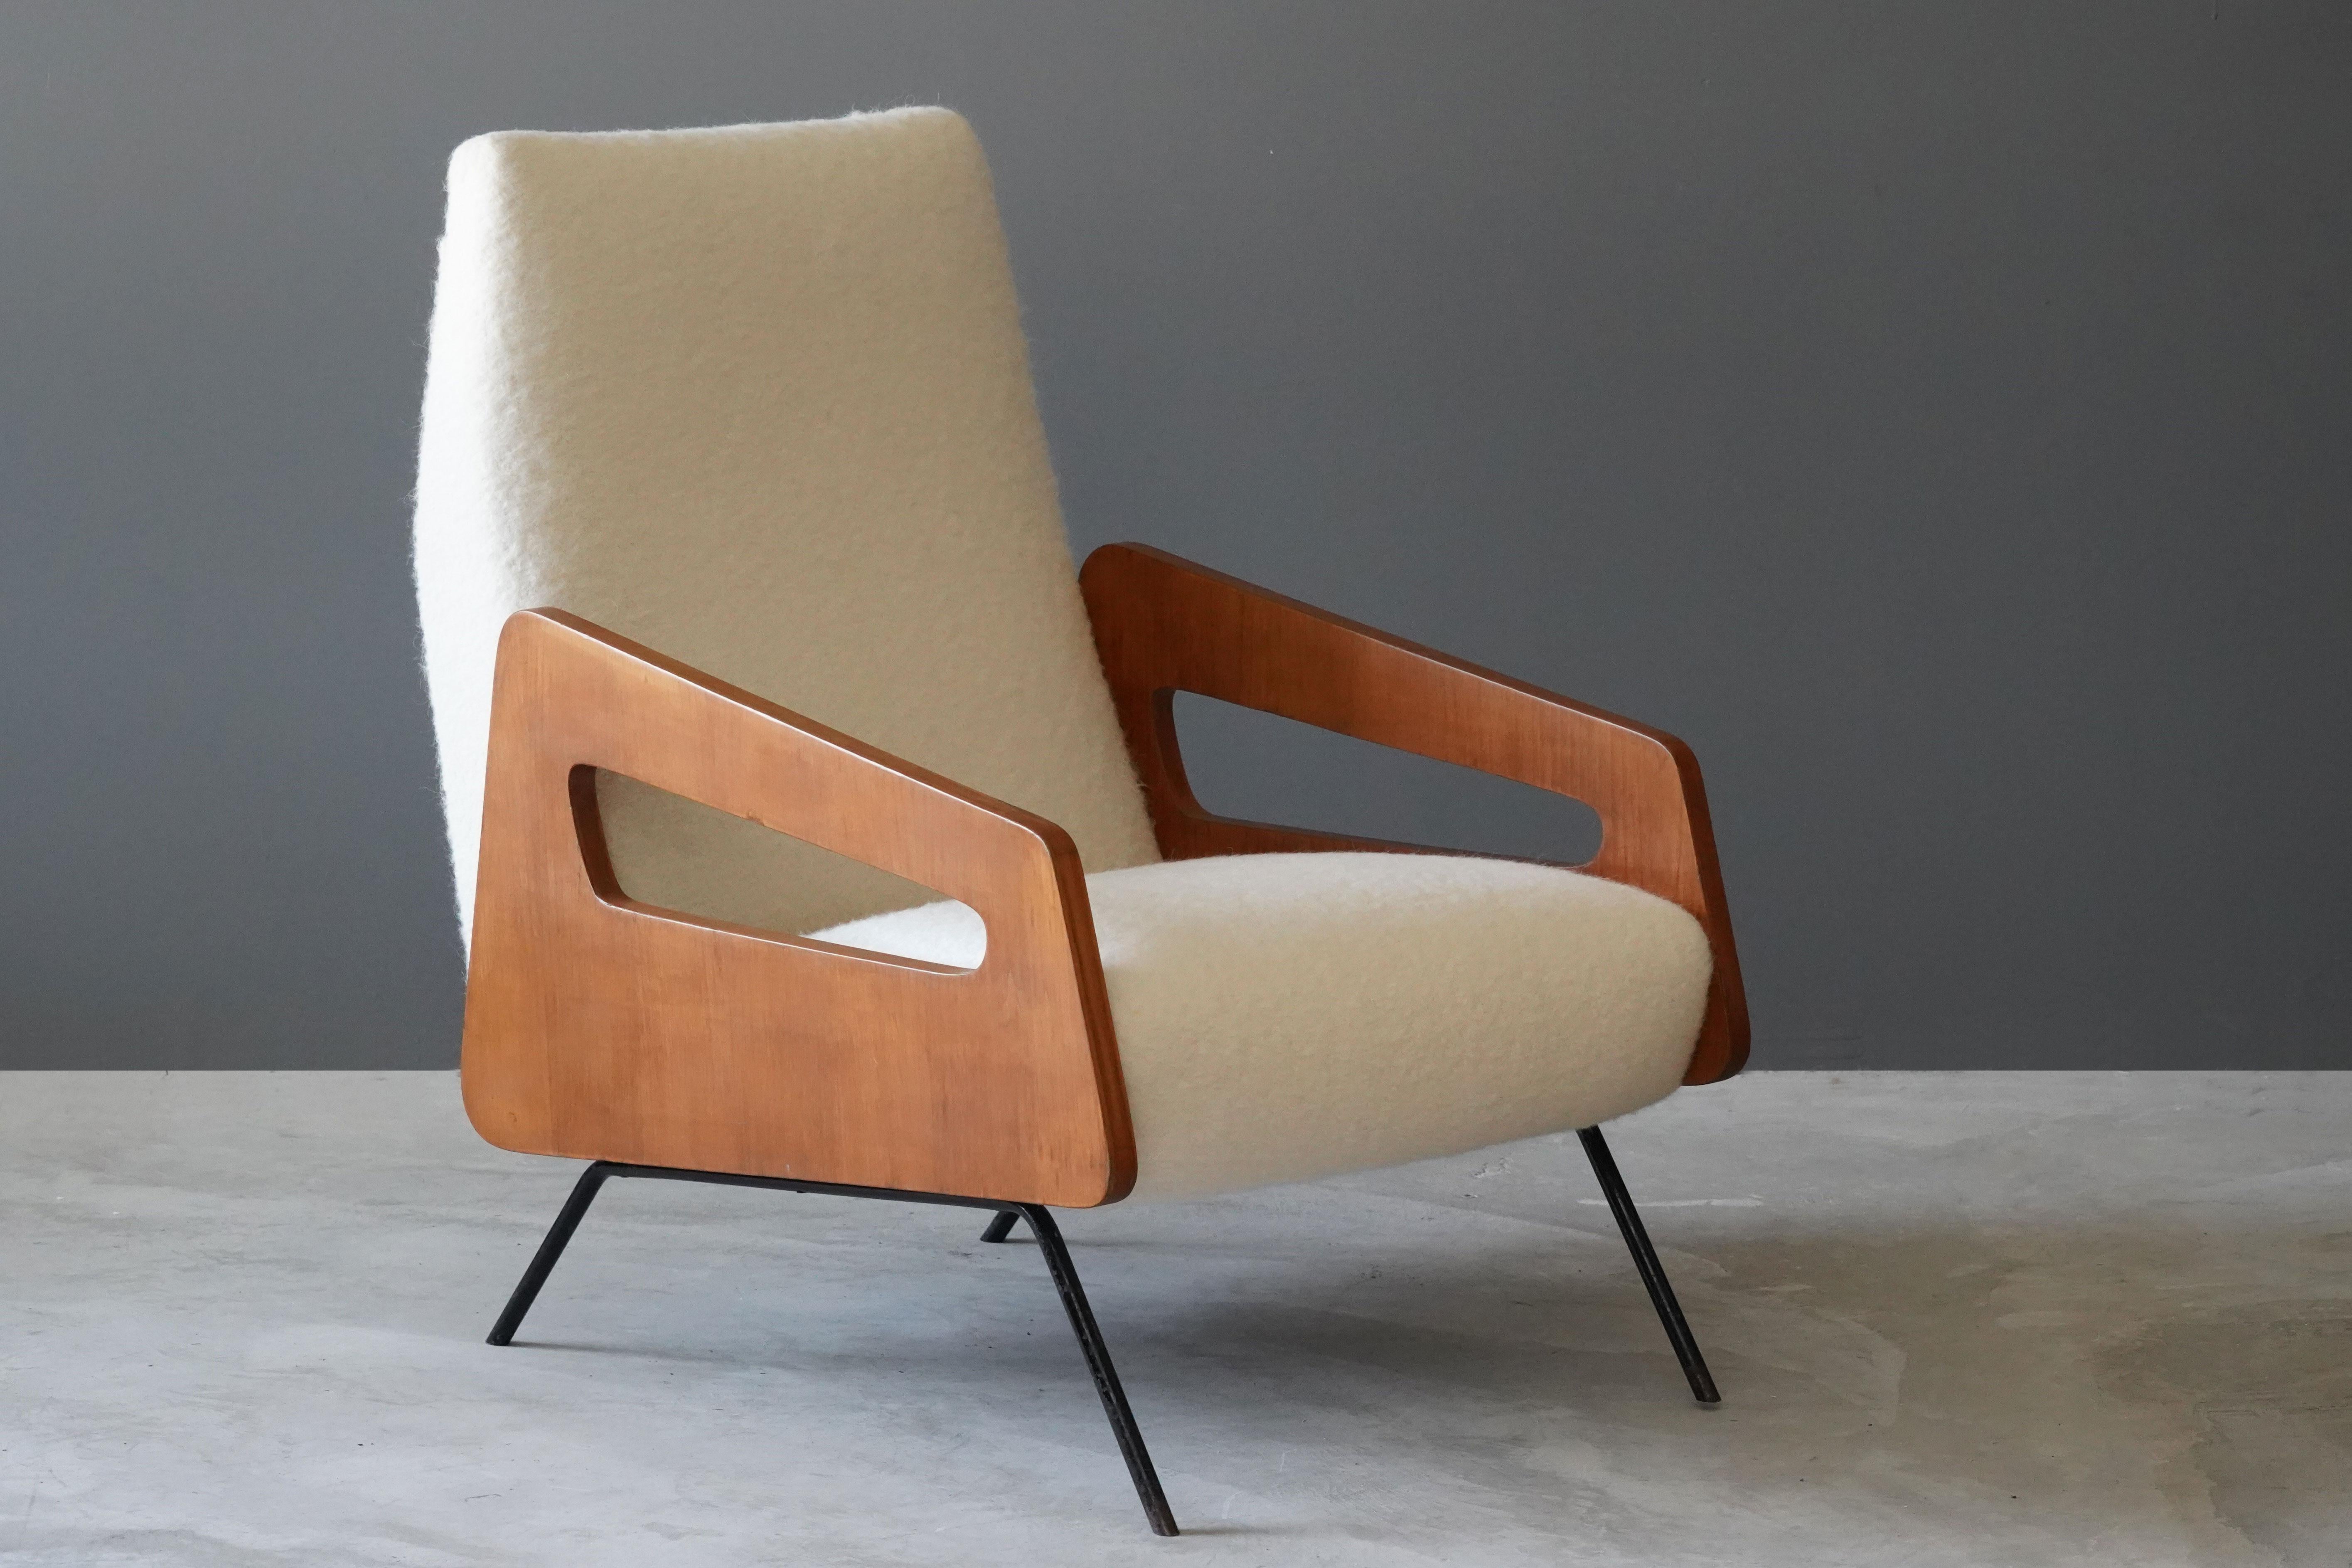 A pair of highly modernist lounge chairs. Designed and produced in Italy, 1950s. Features an interesting mix of materials, brand-new white high-end bouclé, wood, and lacquered steel.

Other designers of the period include Gio Ponti, Franco Albini,